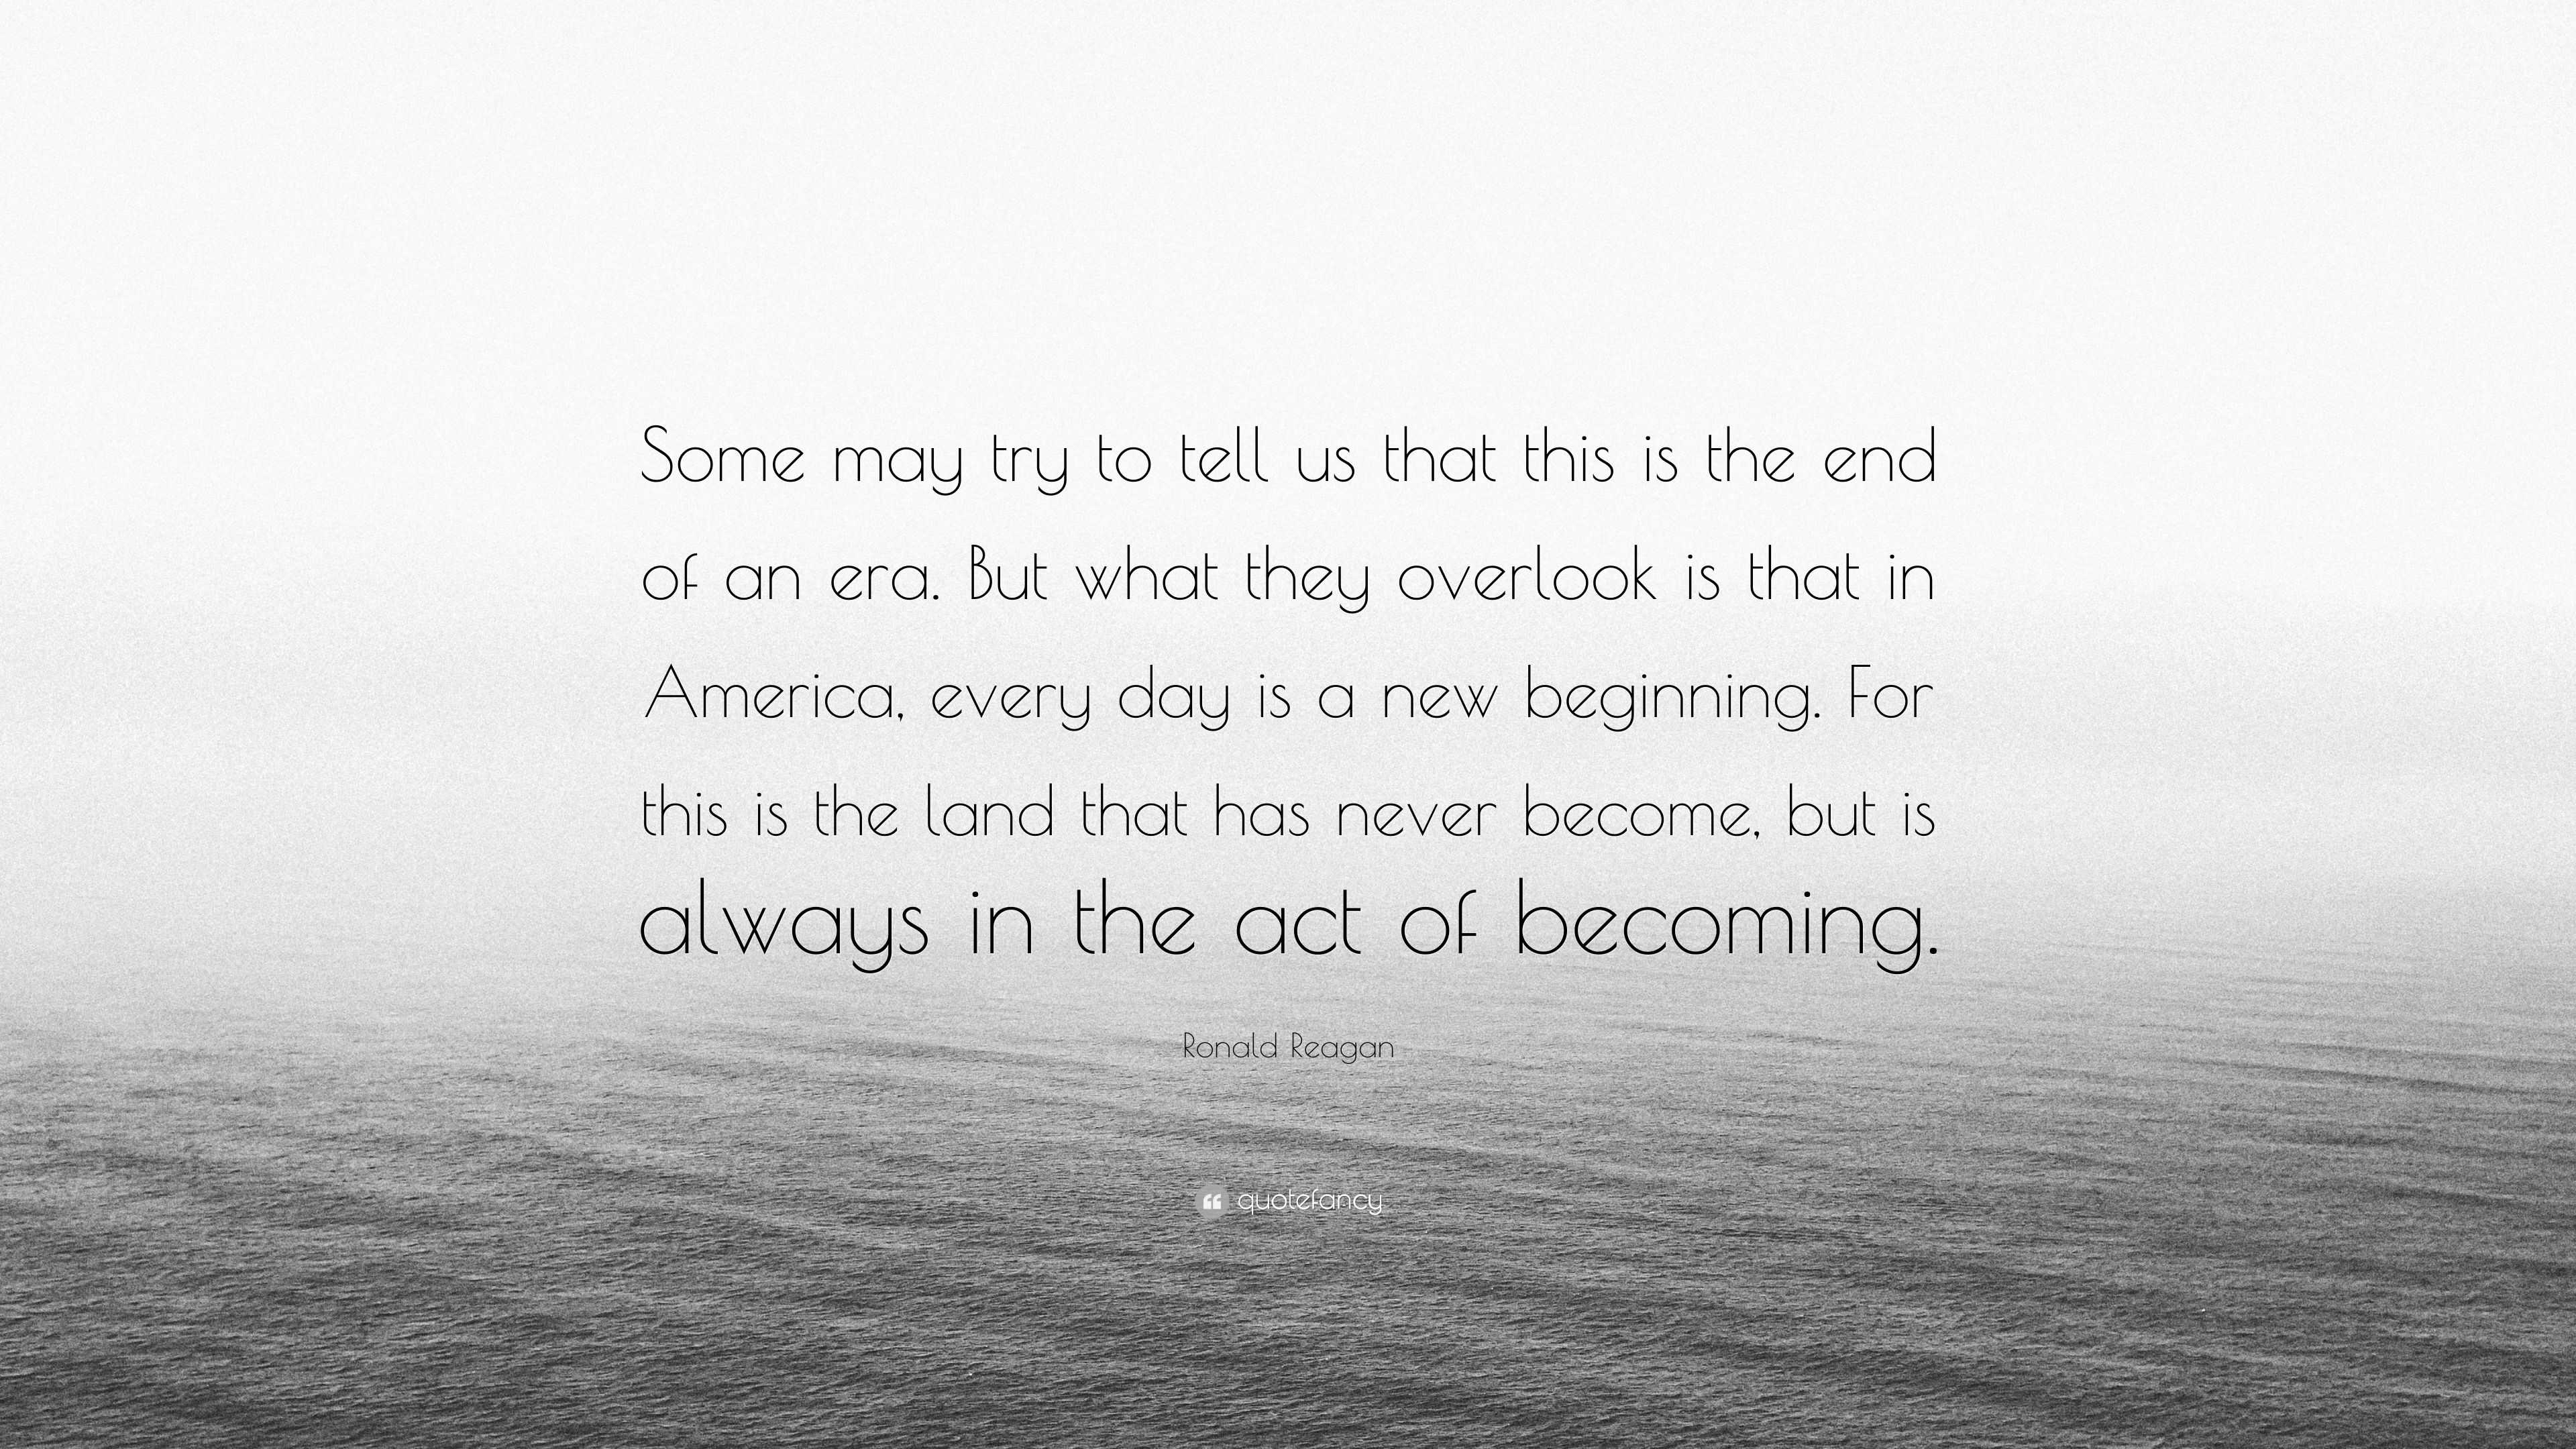 Ronald Reagan Quote: “Some May Try To Tell Us That This Is The End Of An Era. But What They Overlook Is That In America, Every Day Is A New Be...”